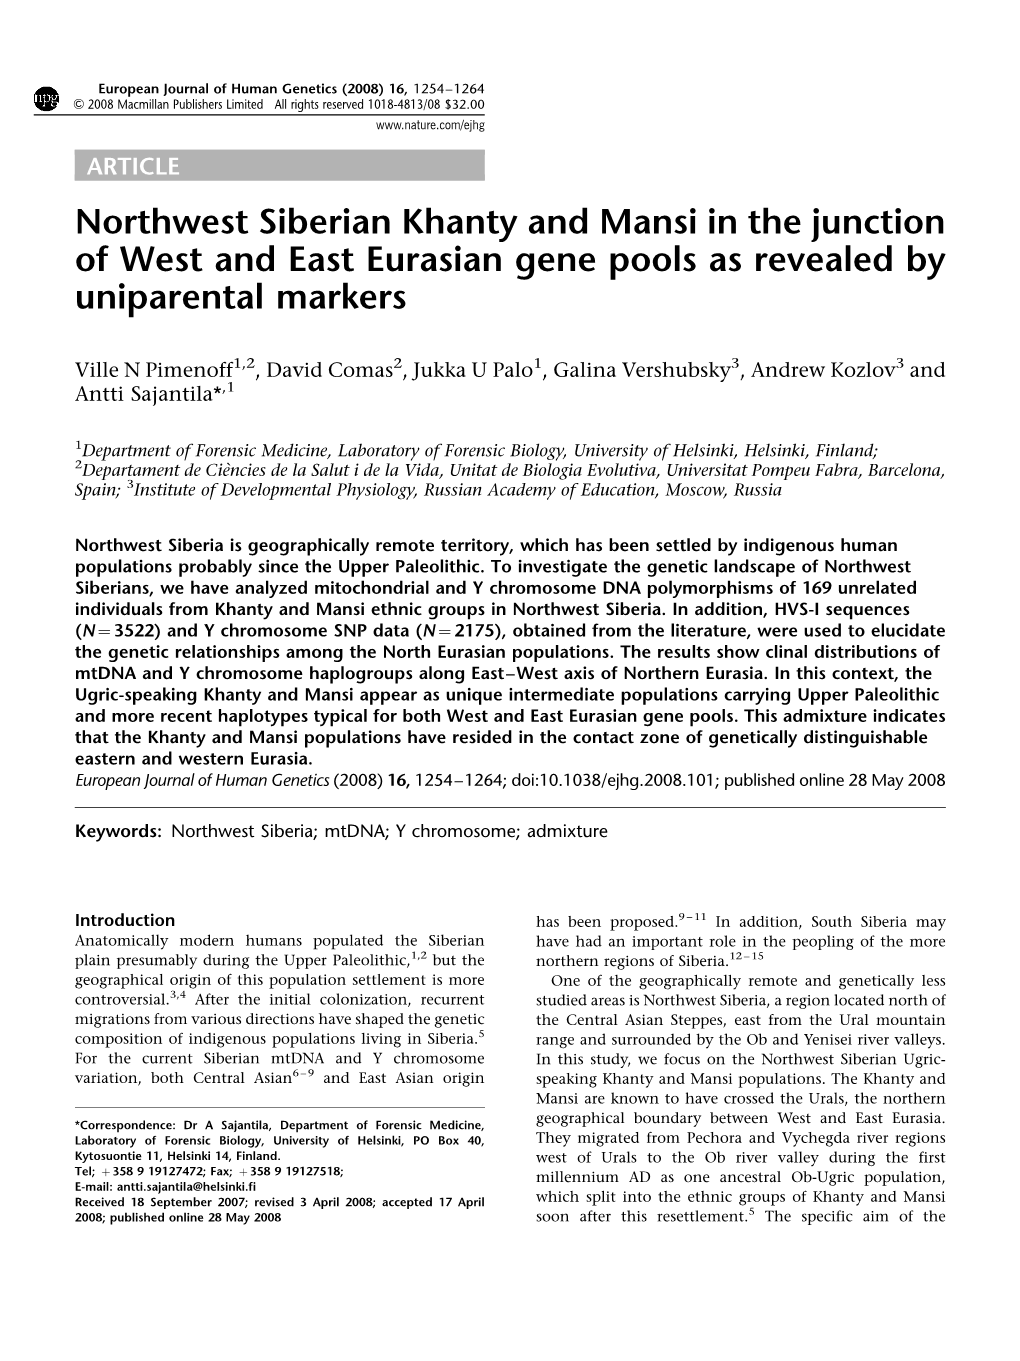 Northwest Siberian Khanty and Mansi in the Junction of West and East Eurasian Gene Pools As Revealed by Uniparental Markers